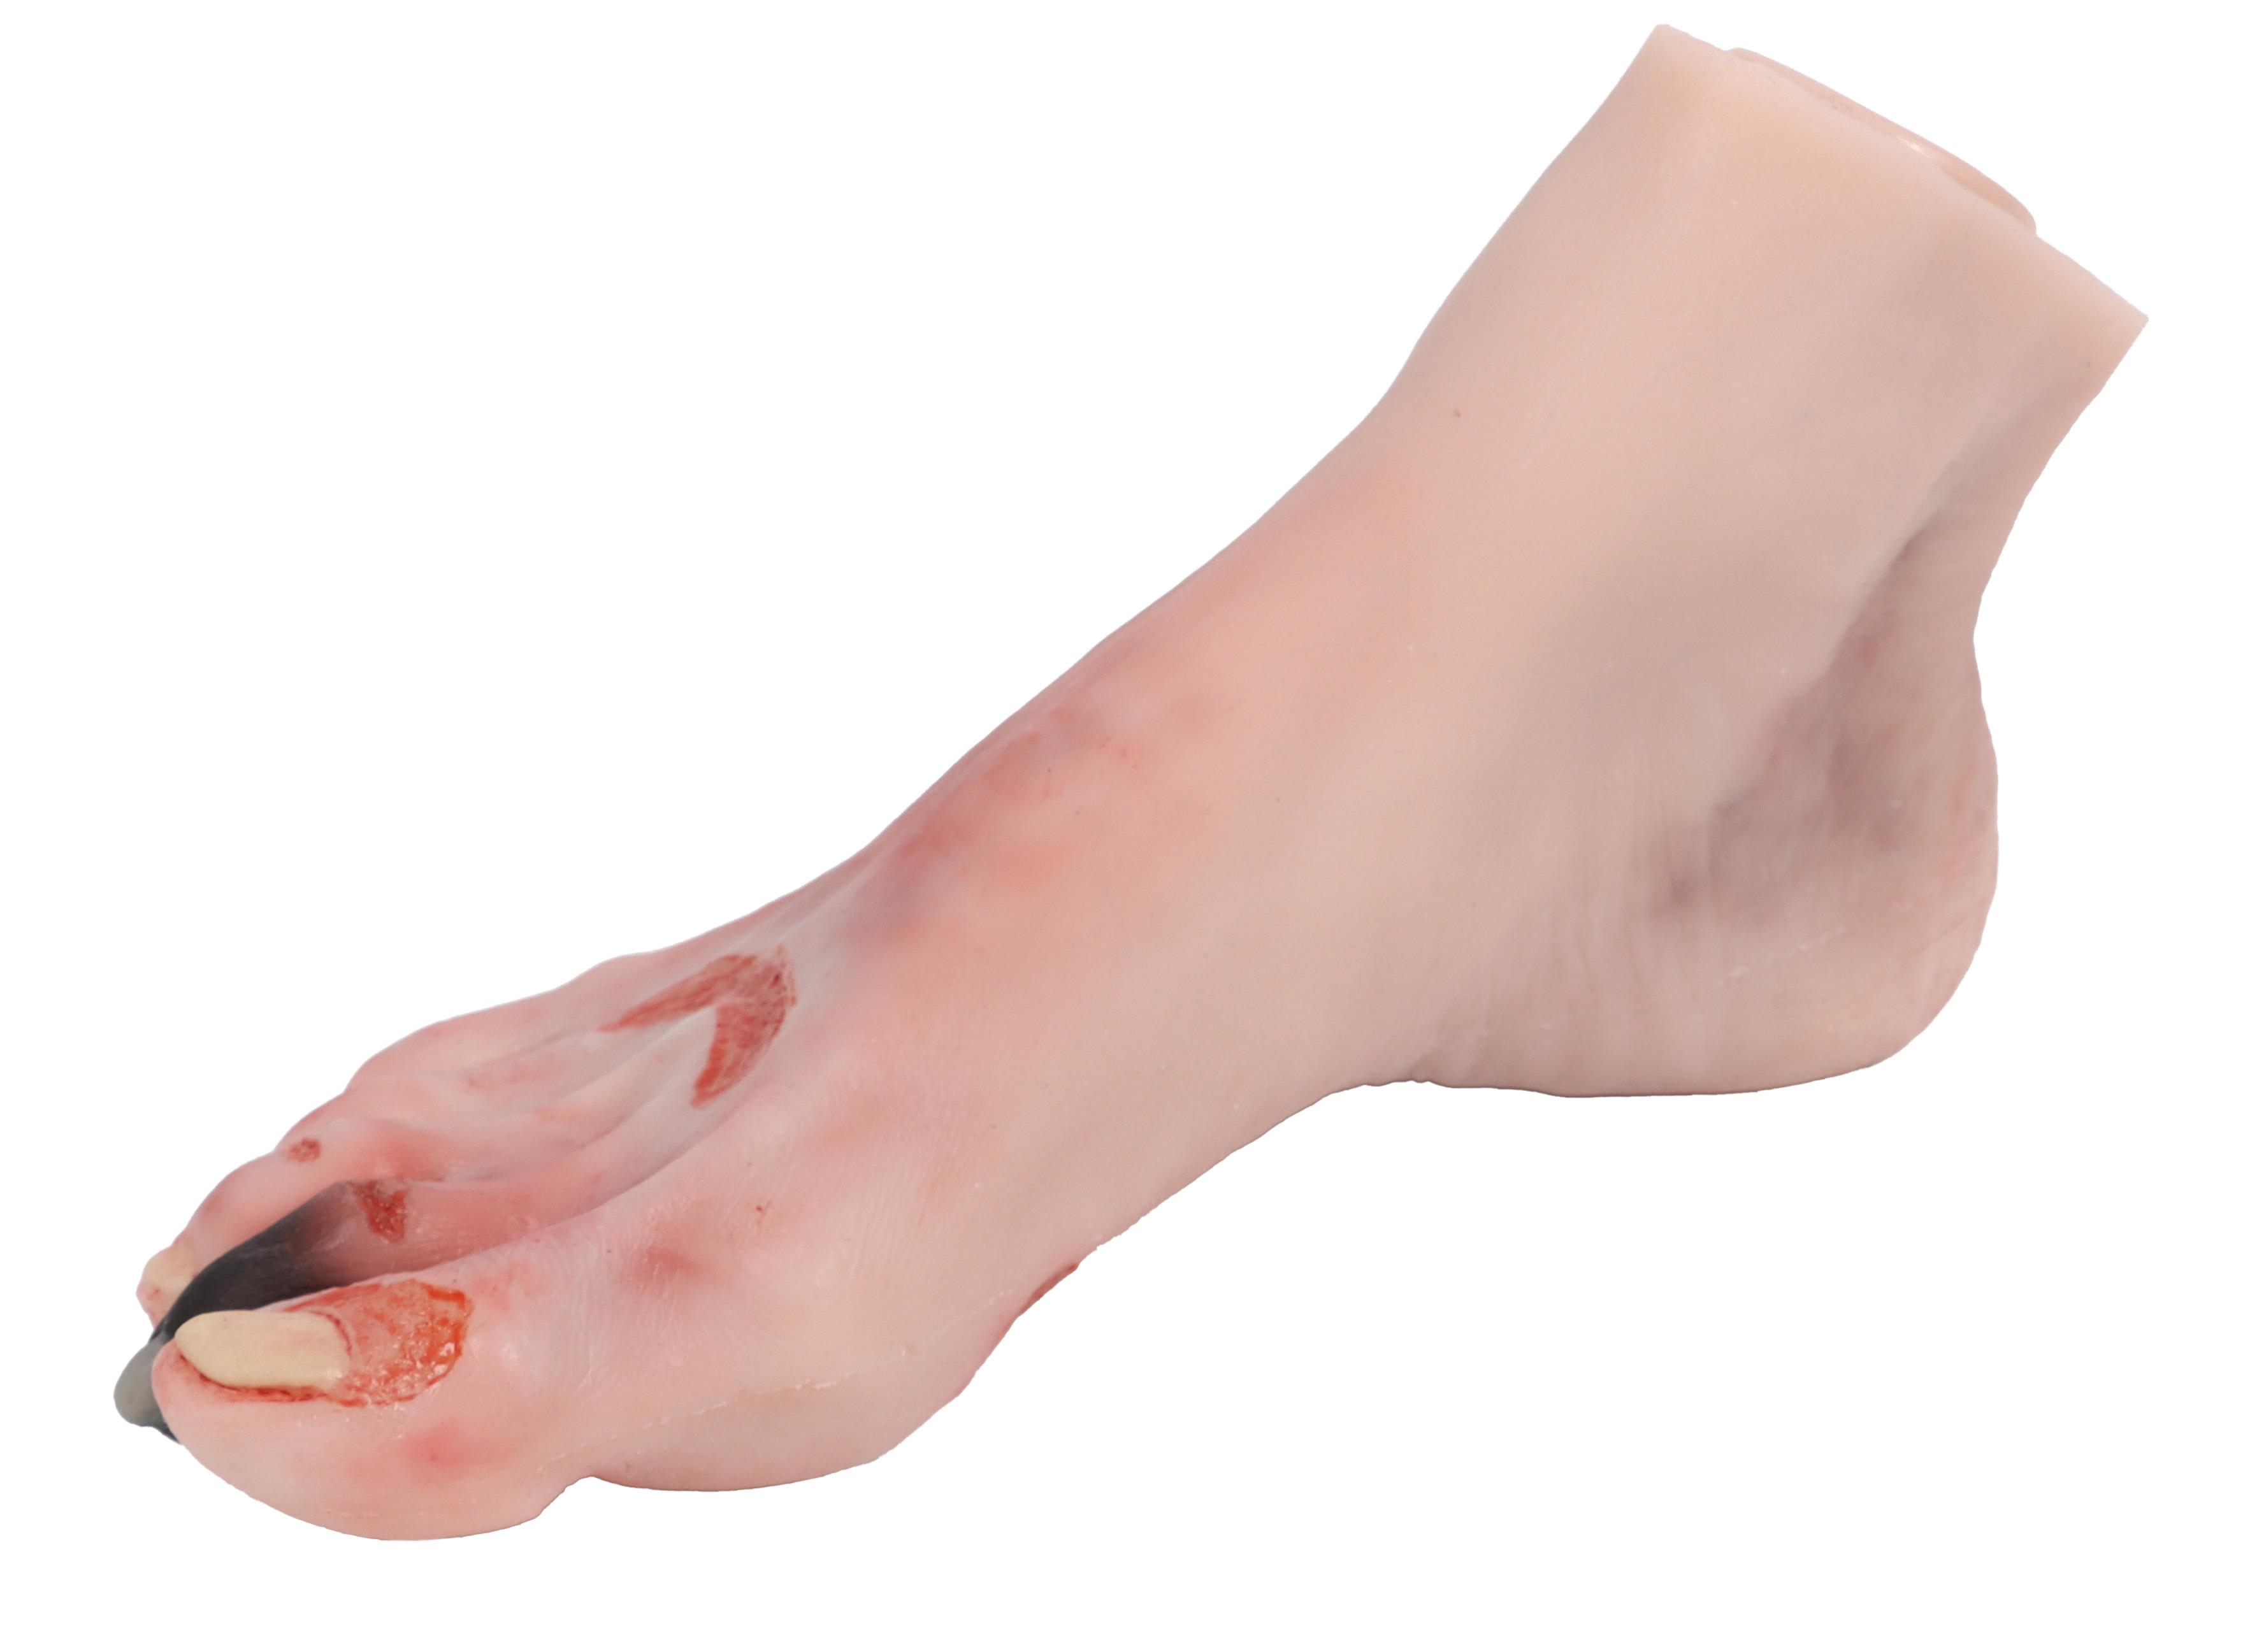 Wound-foot-with-diabetic-foot-syndrome-2